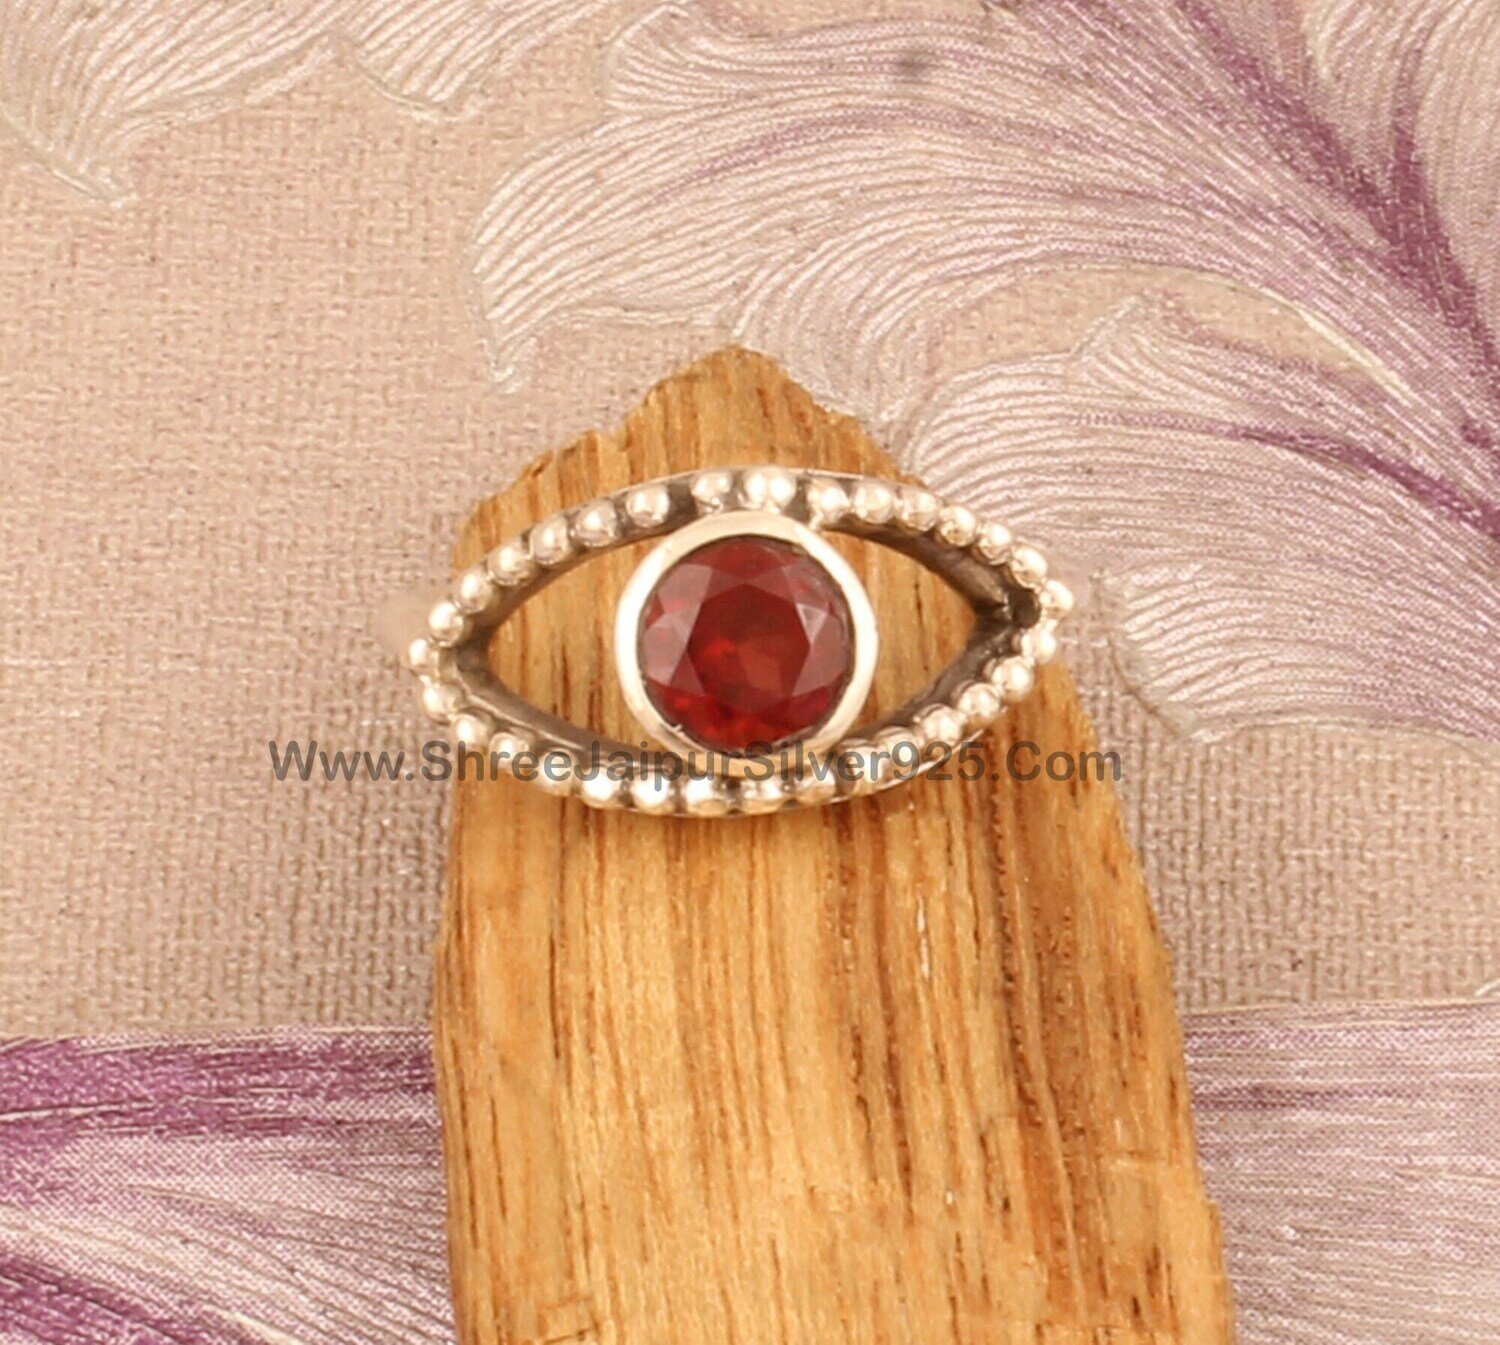 Natural Red Garnet Ring, 925 Sterling Silver Evil Eye Ring, Evil Eye Ring, Round Garnet Gemstone Ring, Designer Handmade Jewelry Gift Idea